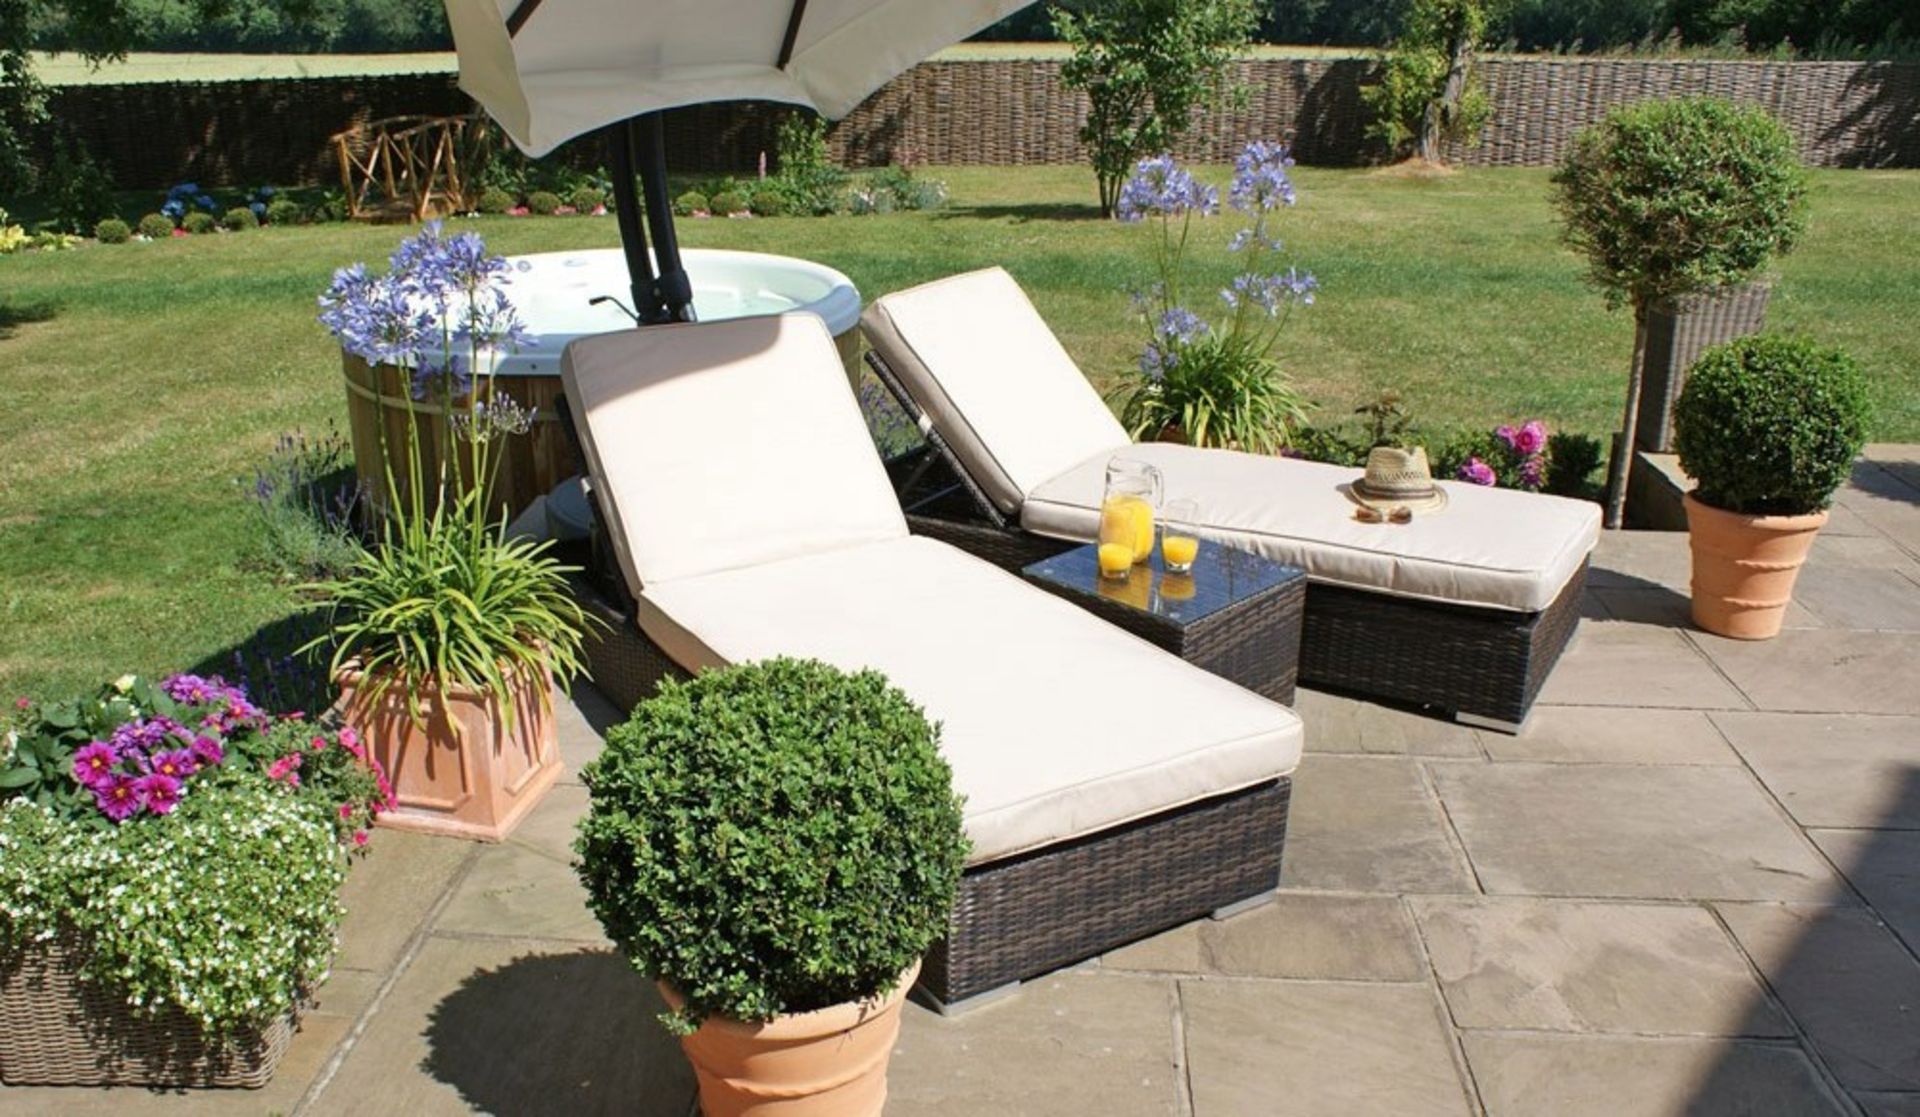 + VAT Brand New Chelsea Garden Company Brown Rattan Sunloungers & Table Set - Item Is Available